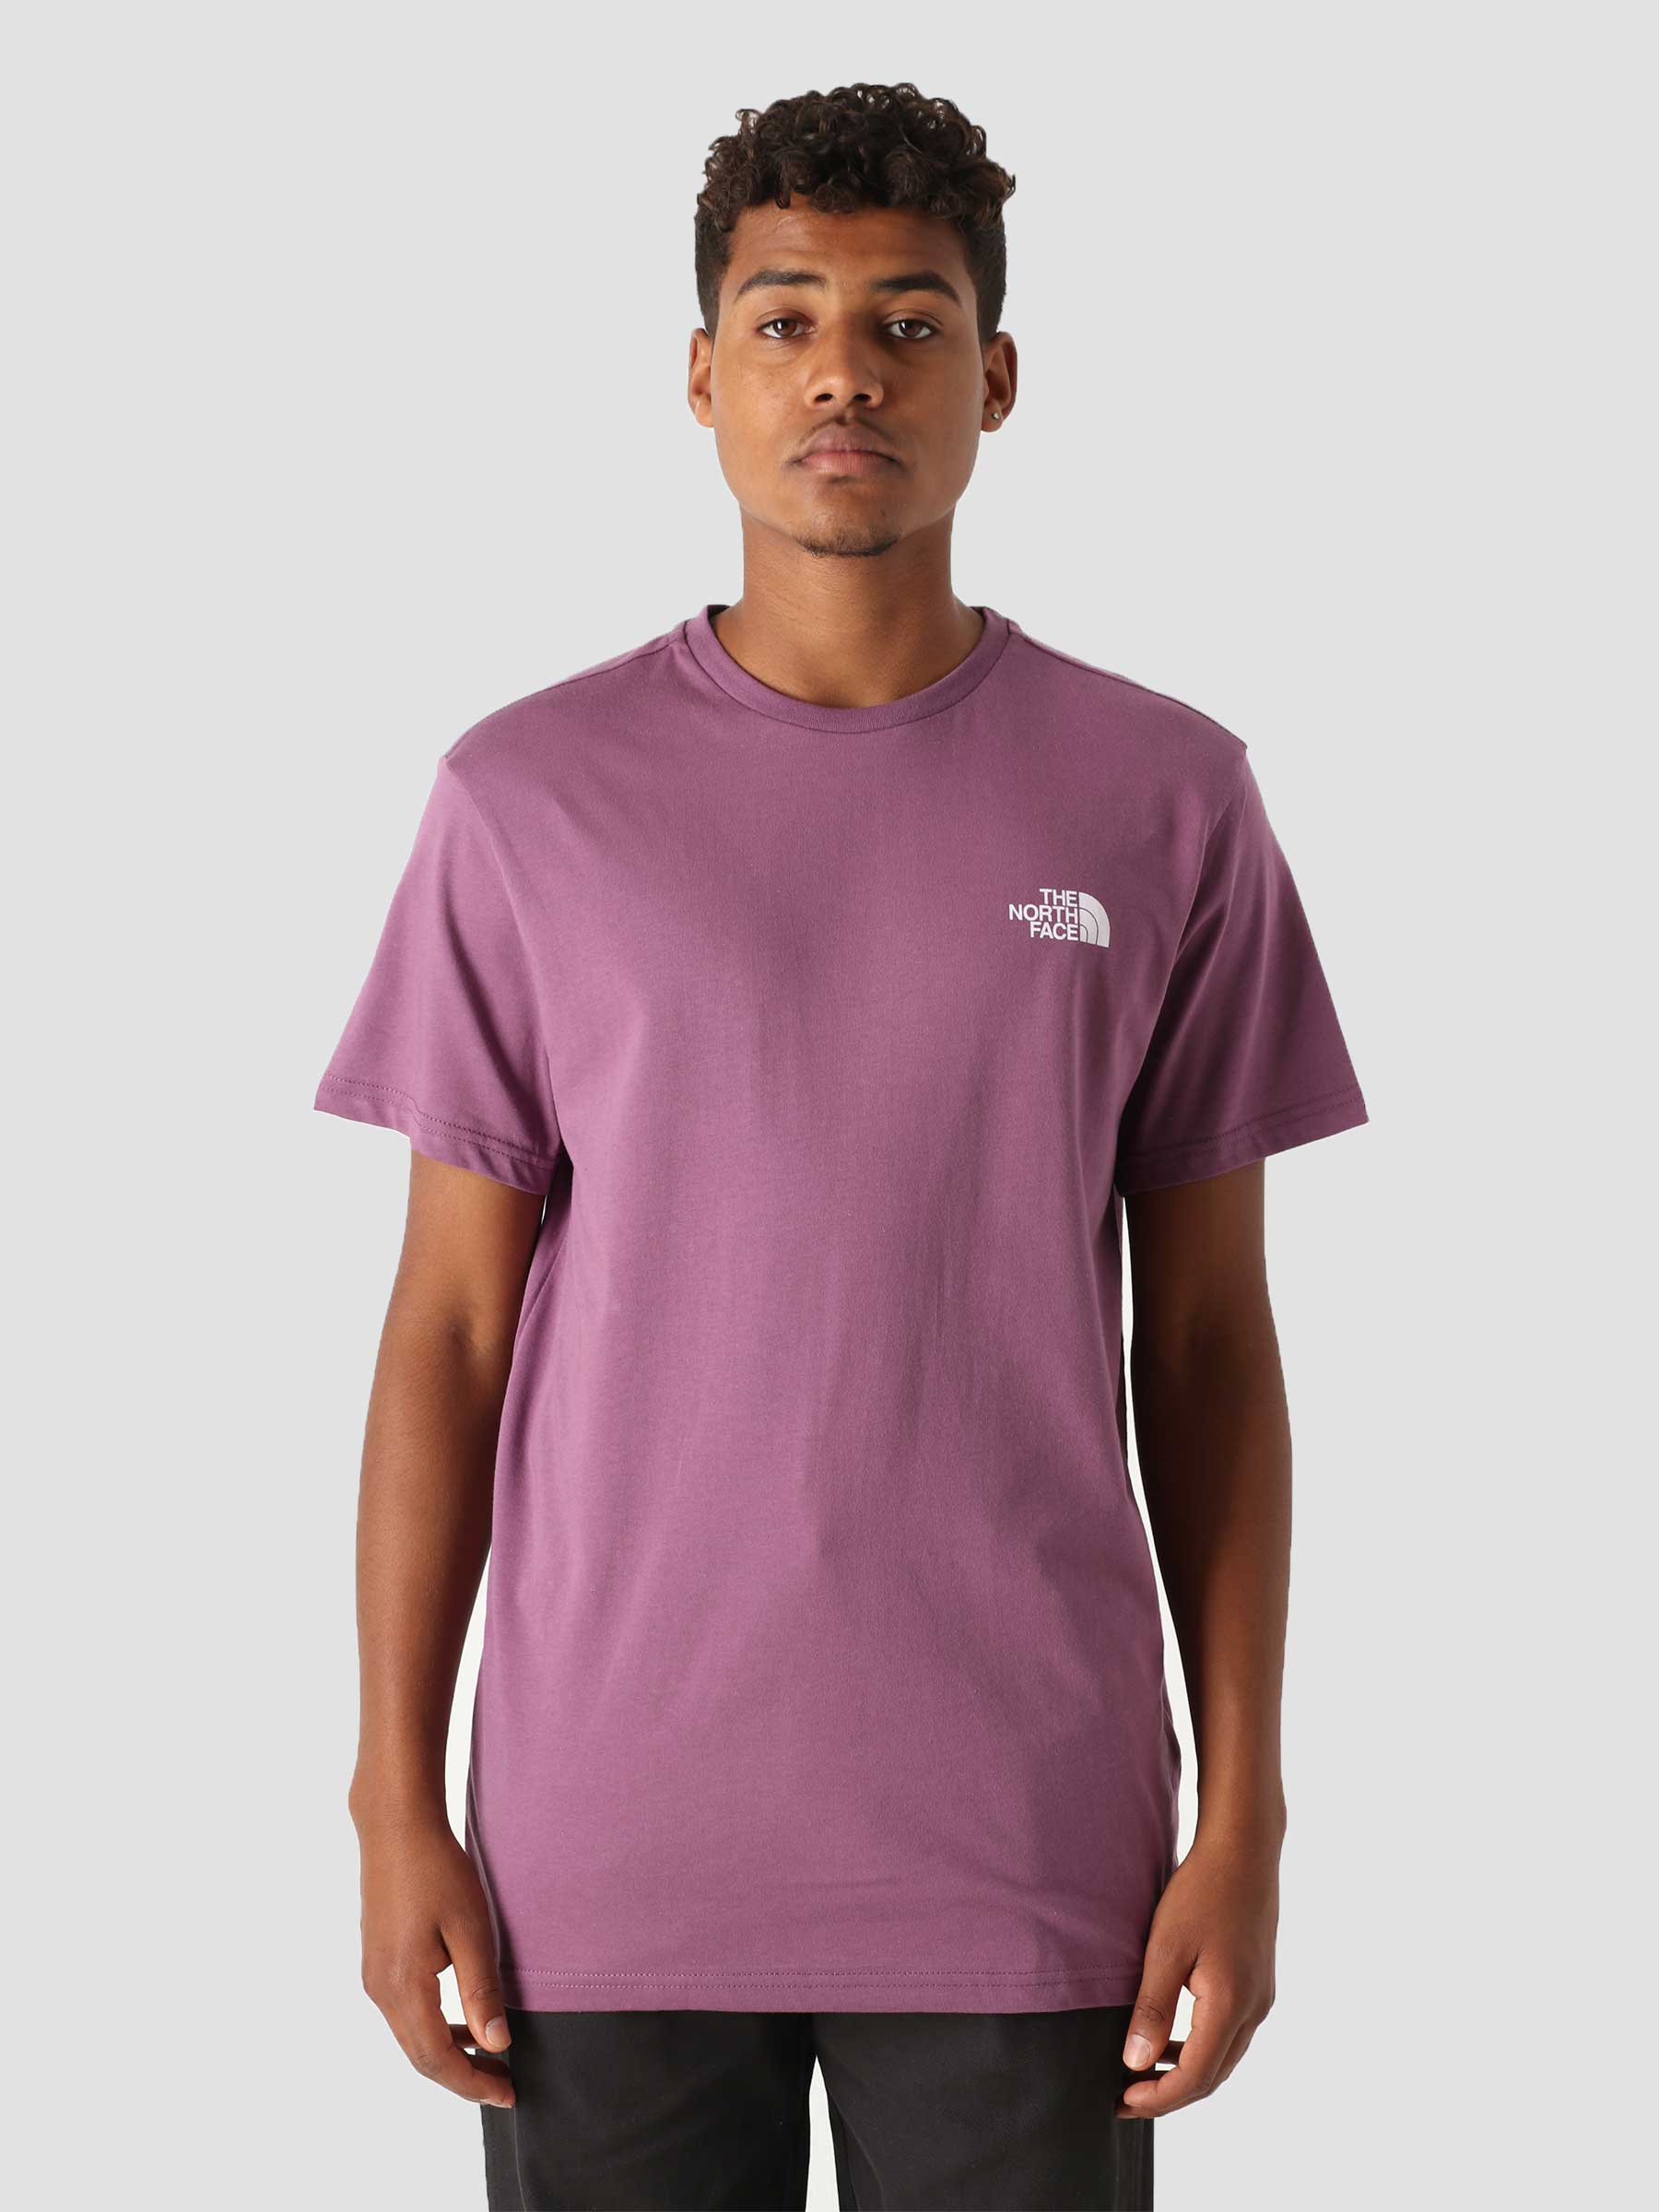 The North Face Simple T-Shirt Purple Pikes - Dome Freshcotton